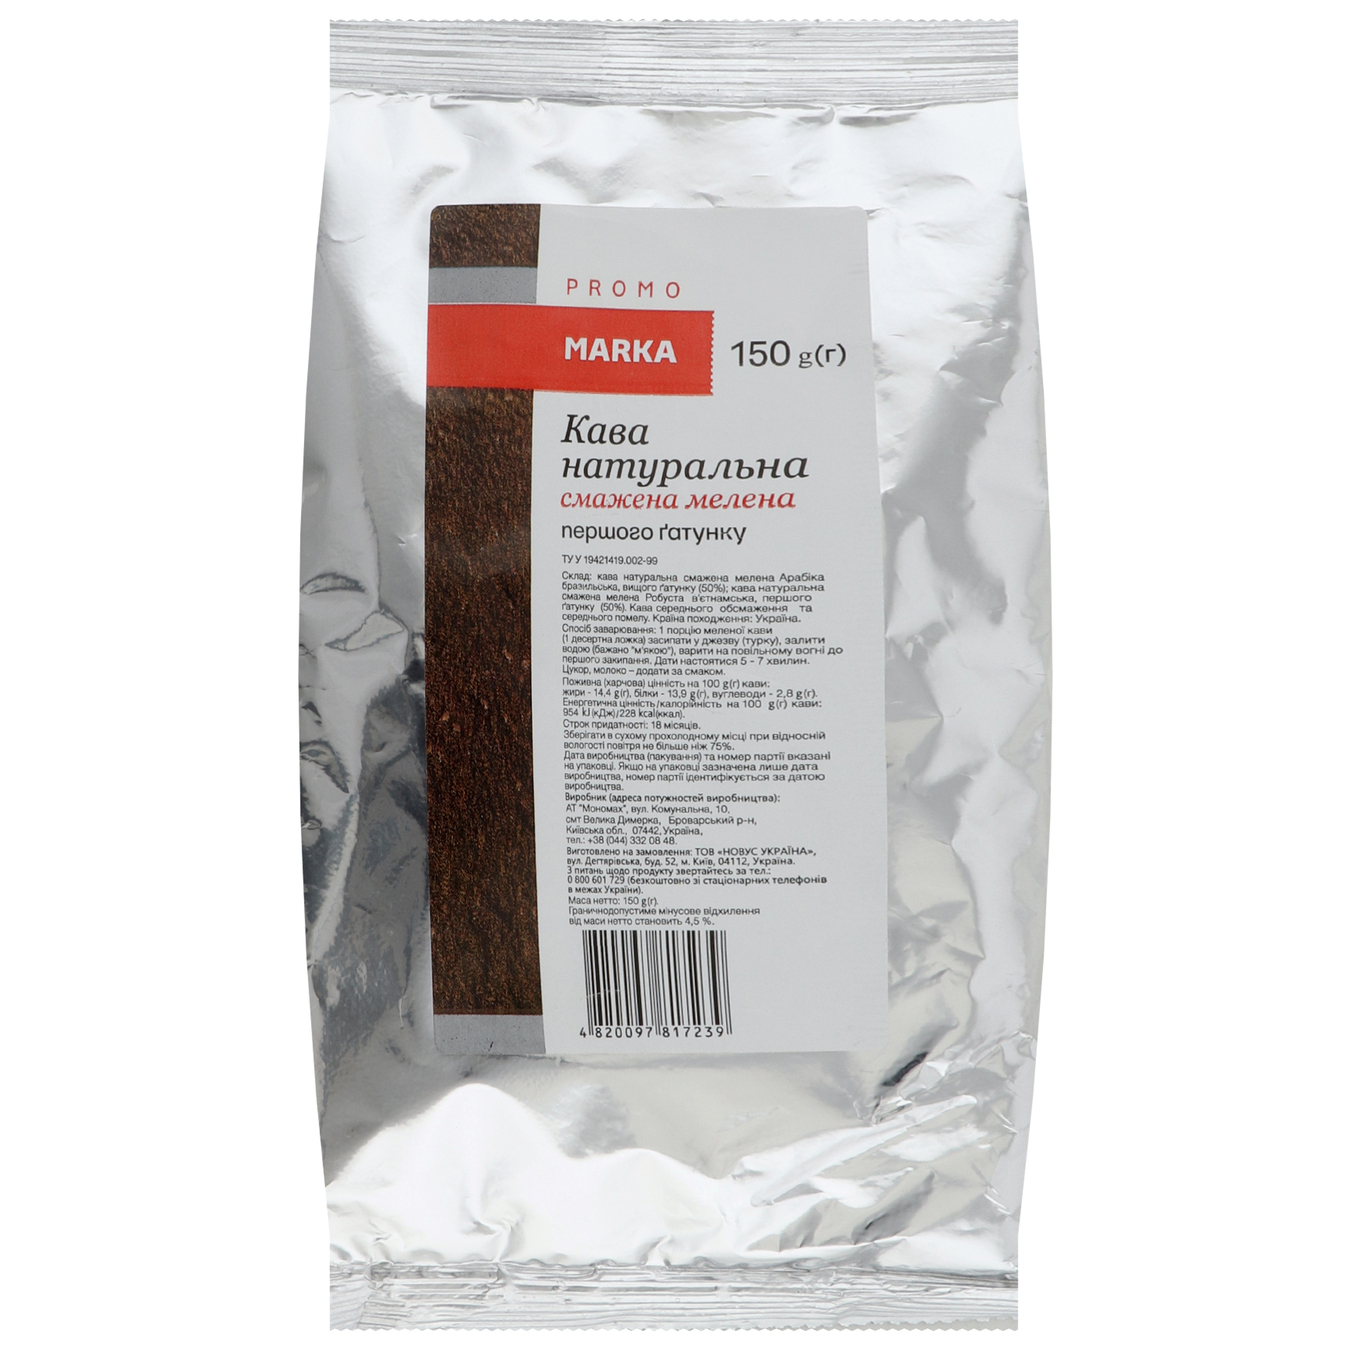 Marka Promo Natural Roasted Ground Coffee 150g